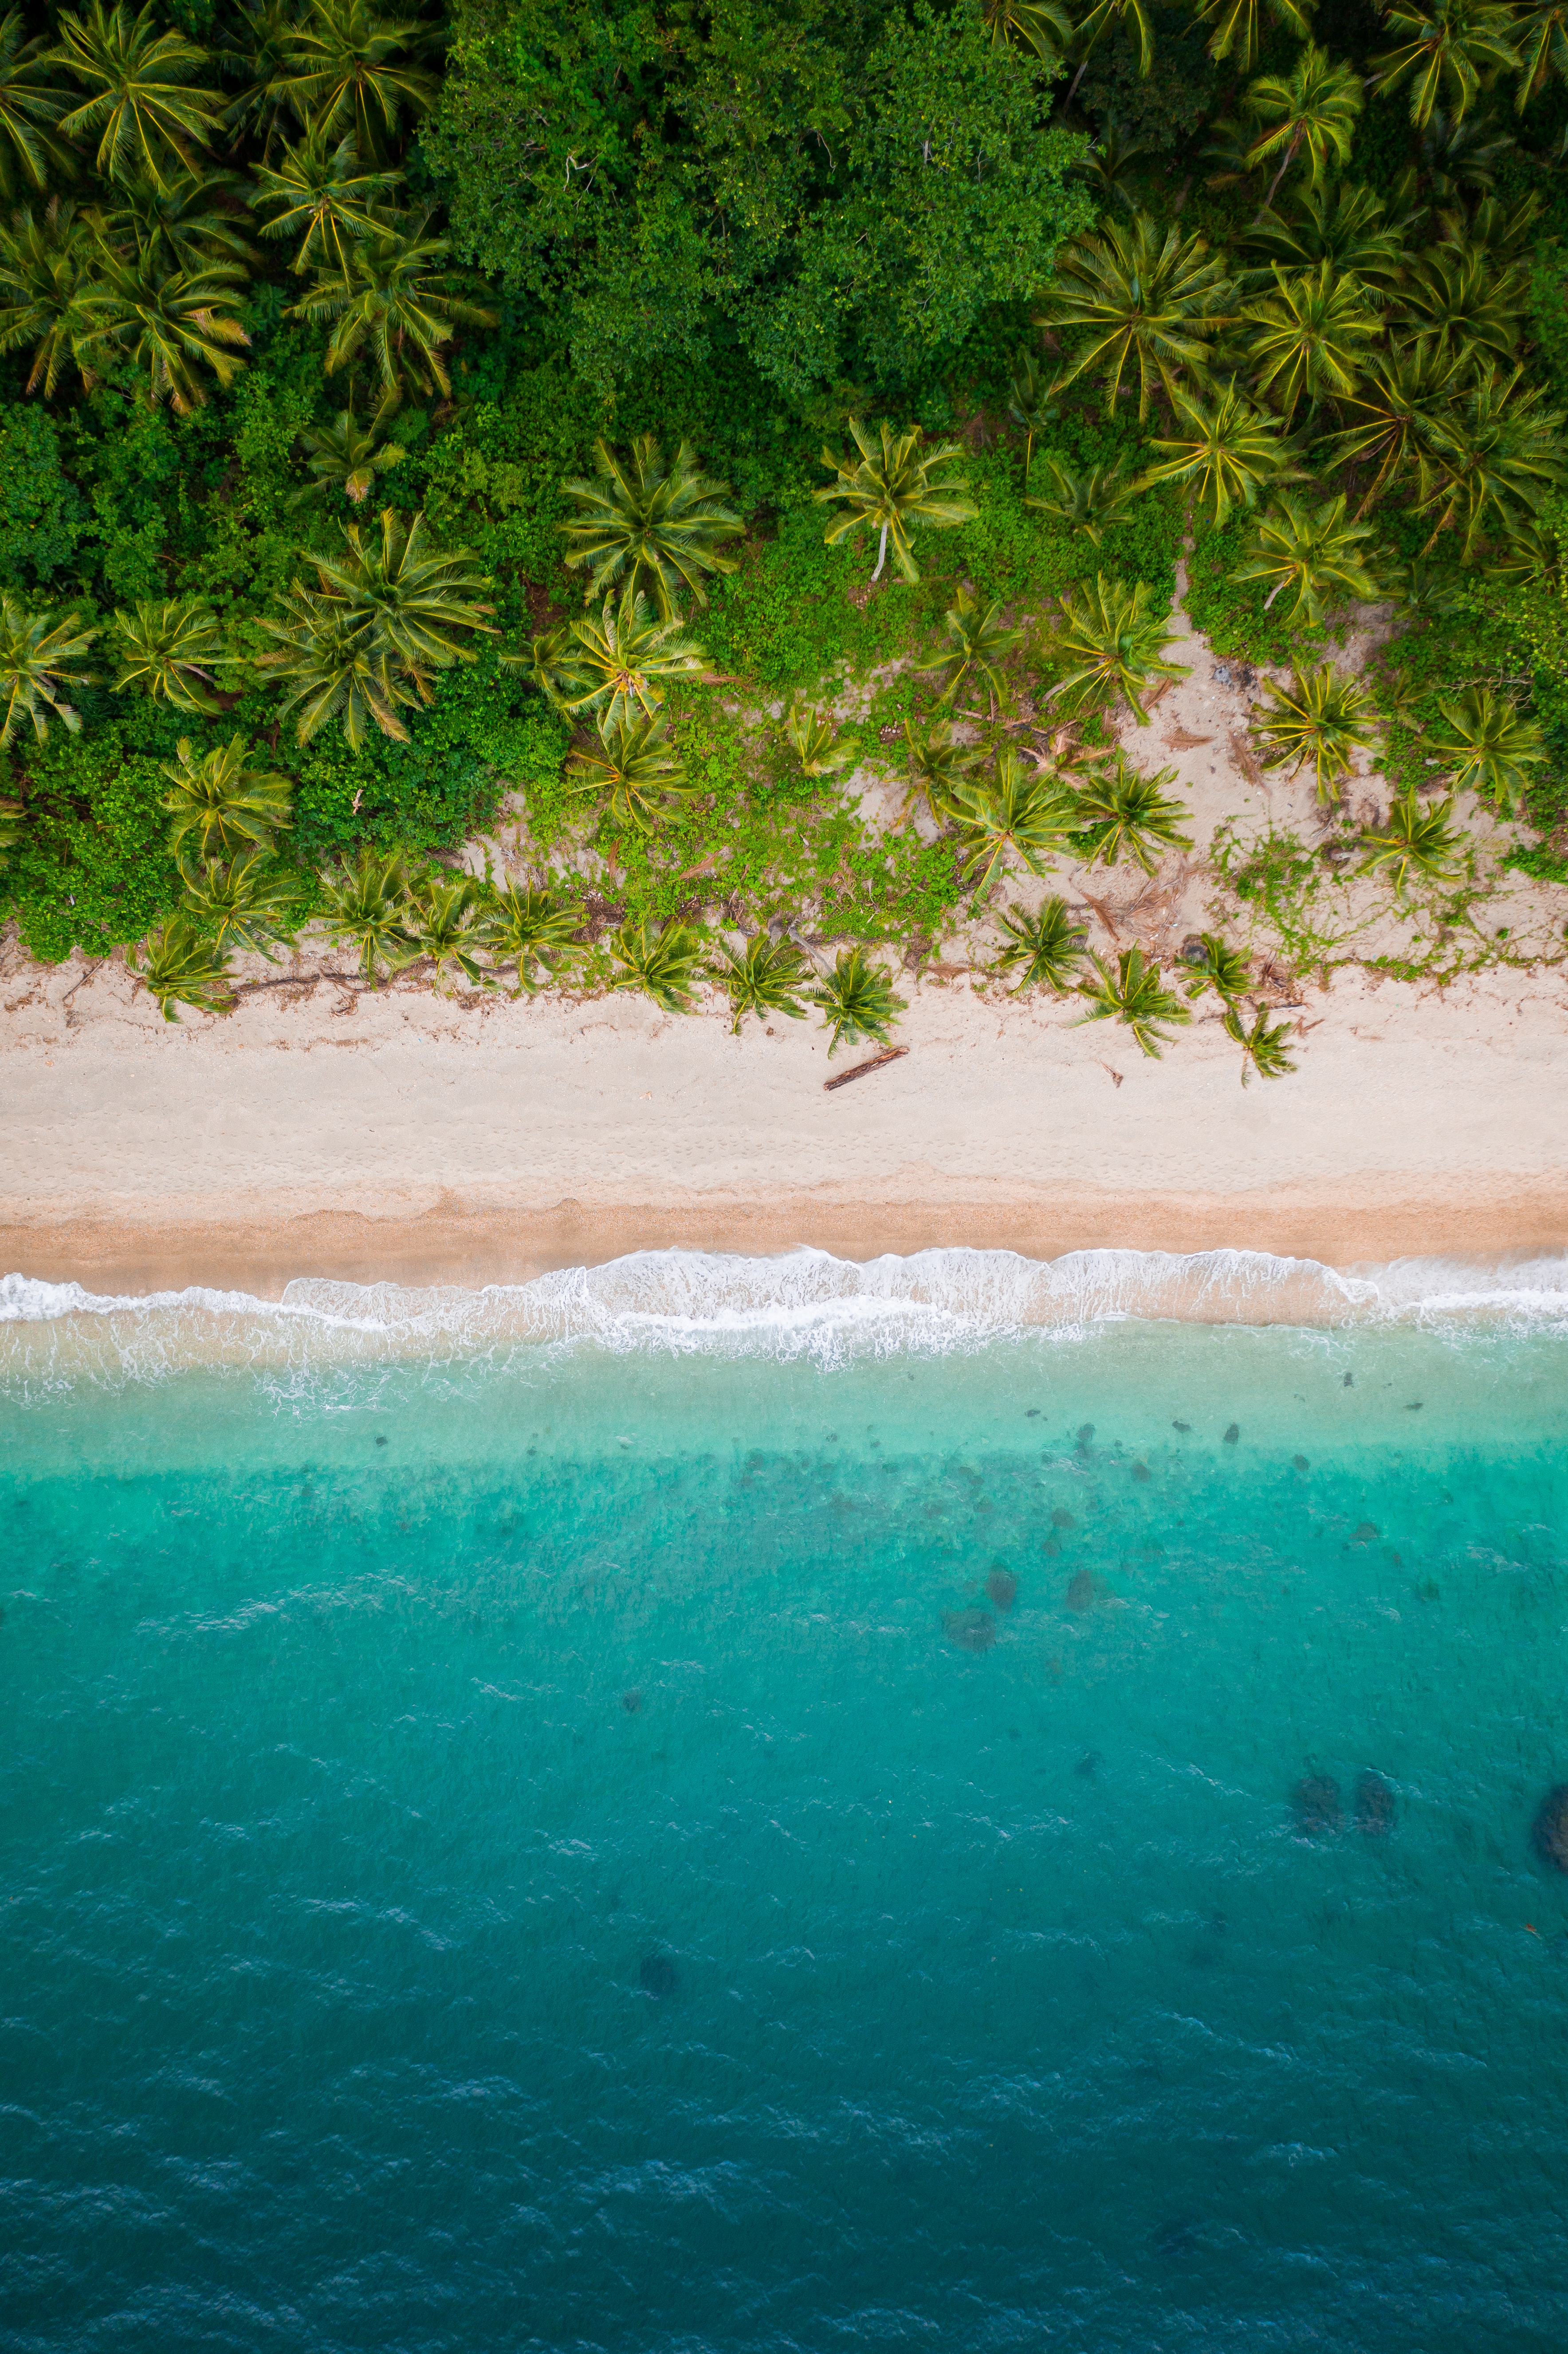 view from above, bank, beach, nature, palms, sand, shore